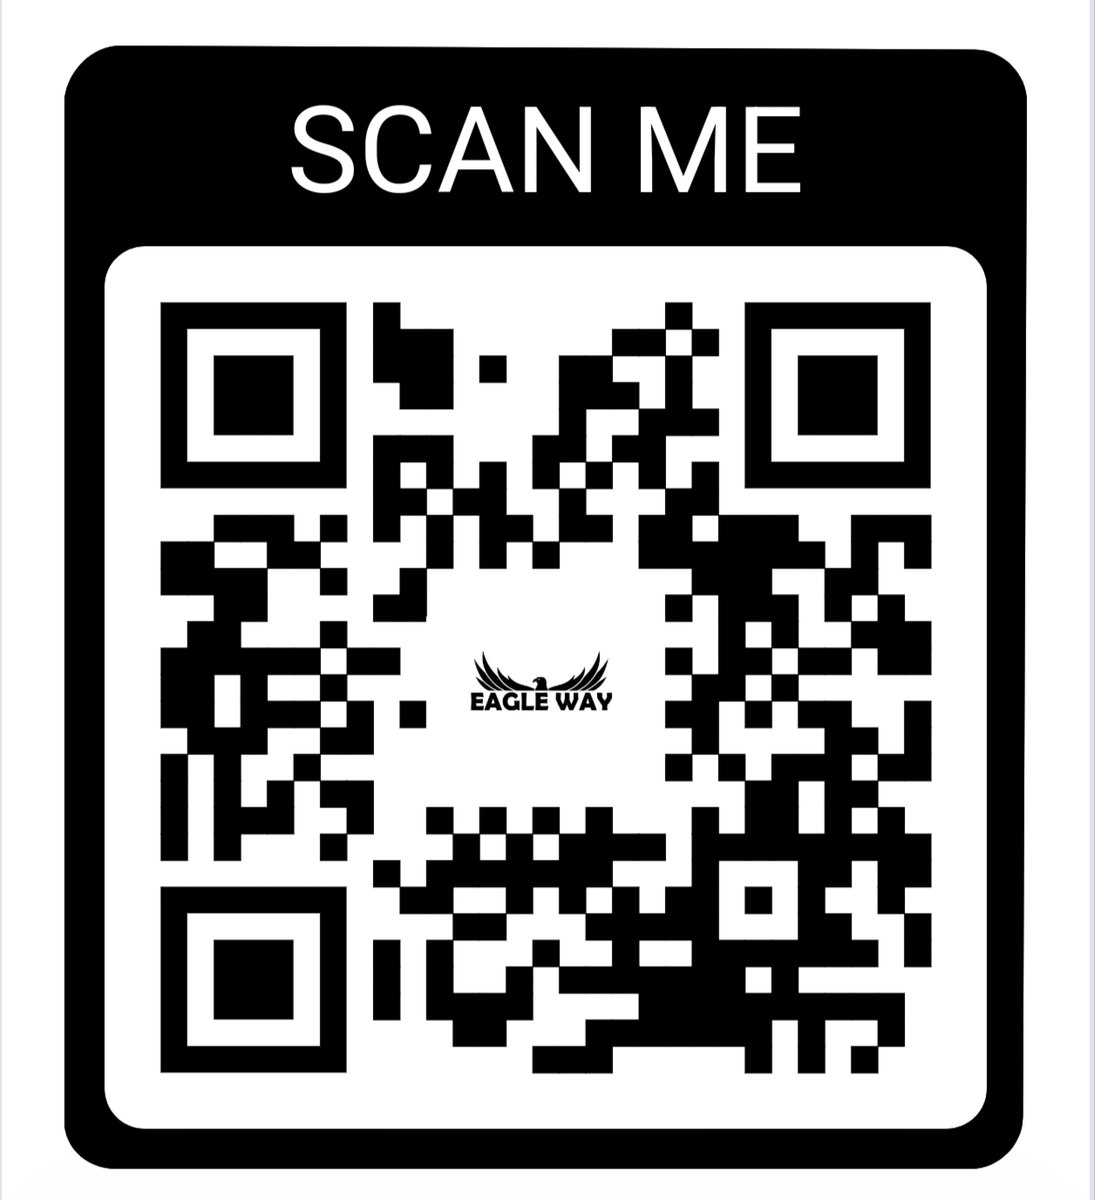 About Us .
Scan & Give review and stars.
#eaglewayglobal 
#eagleway 
#QRCodes 
#companyprofile